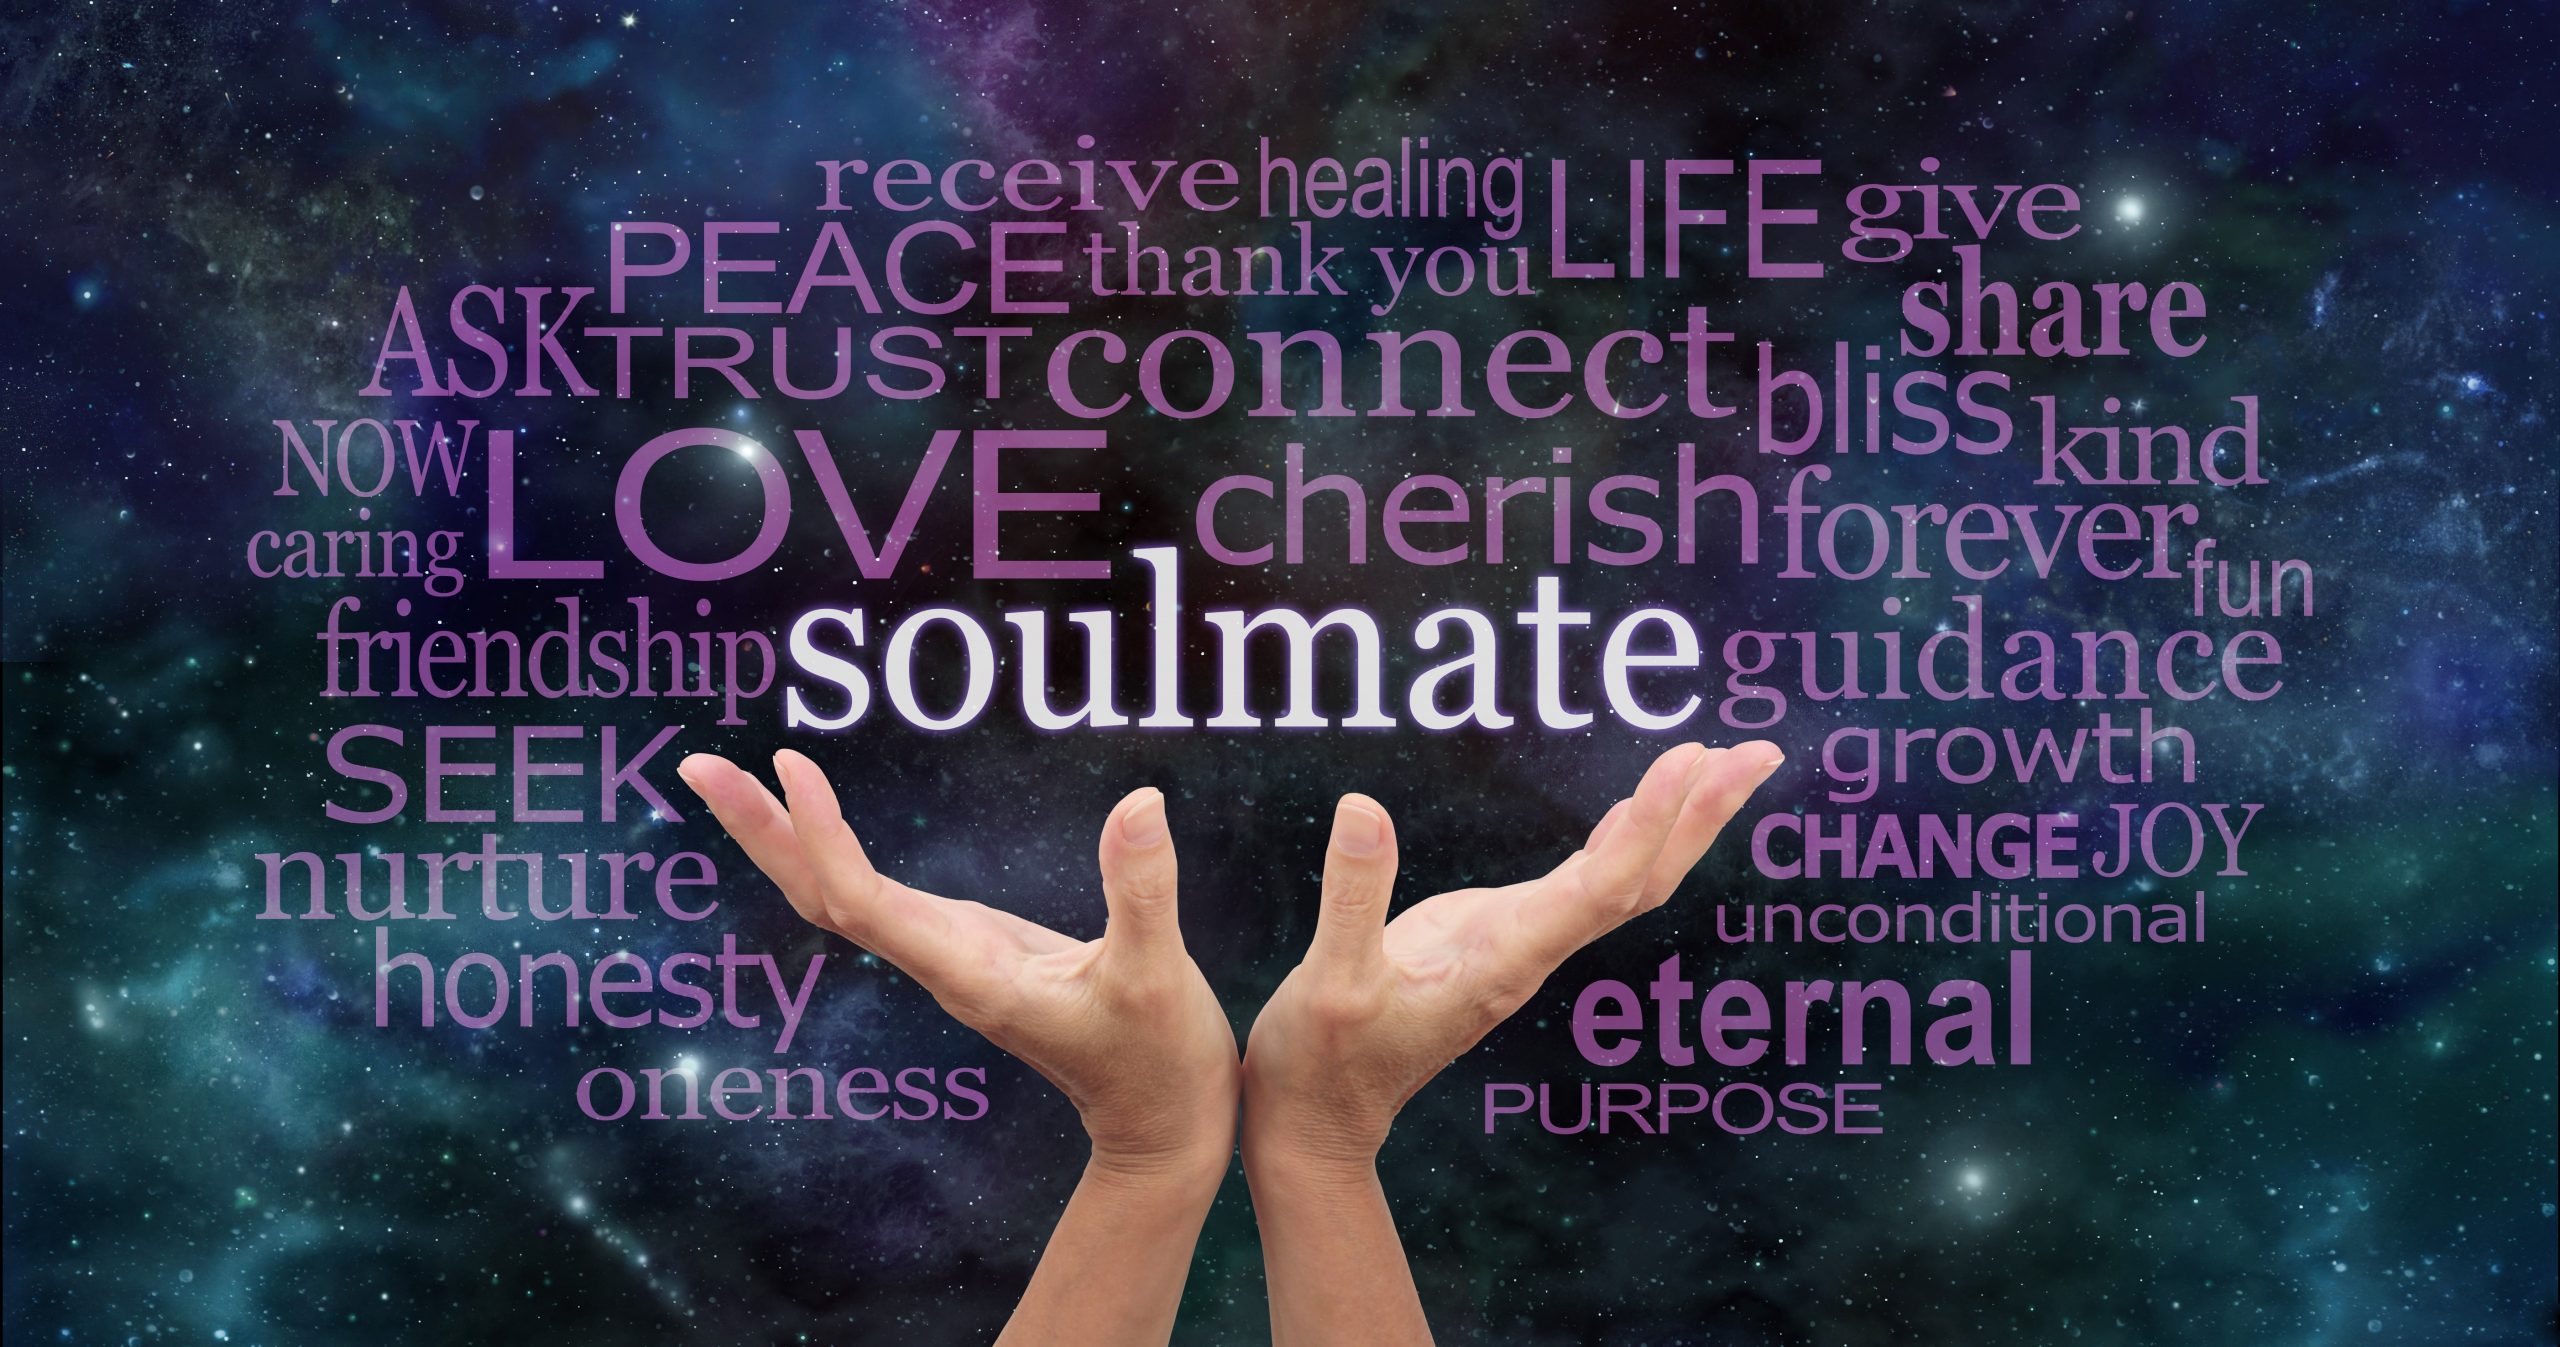 How to Find Your Soulmate: 10 Creative Actions